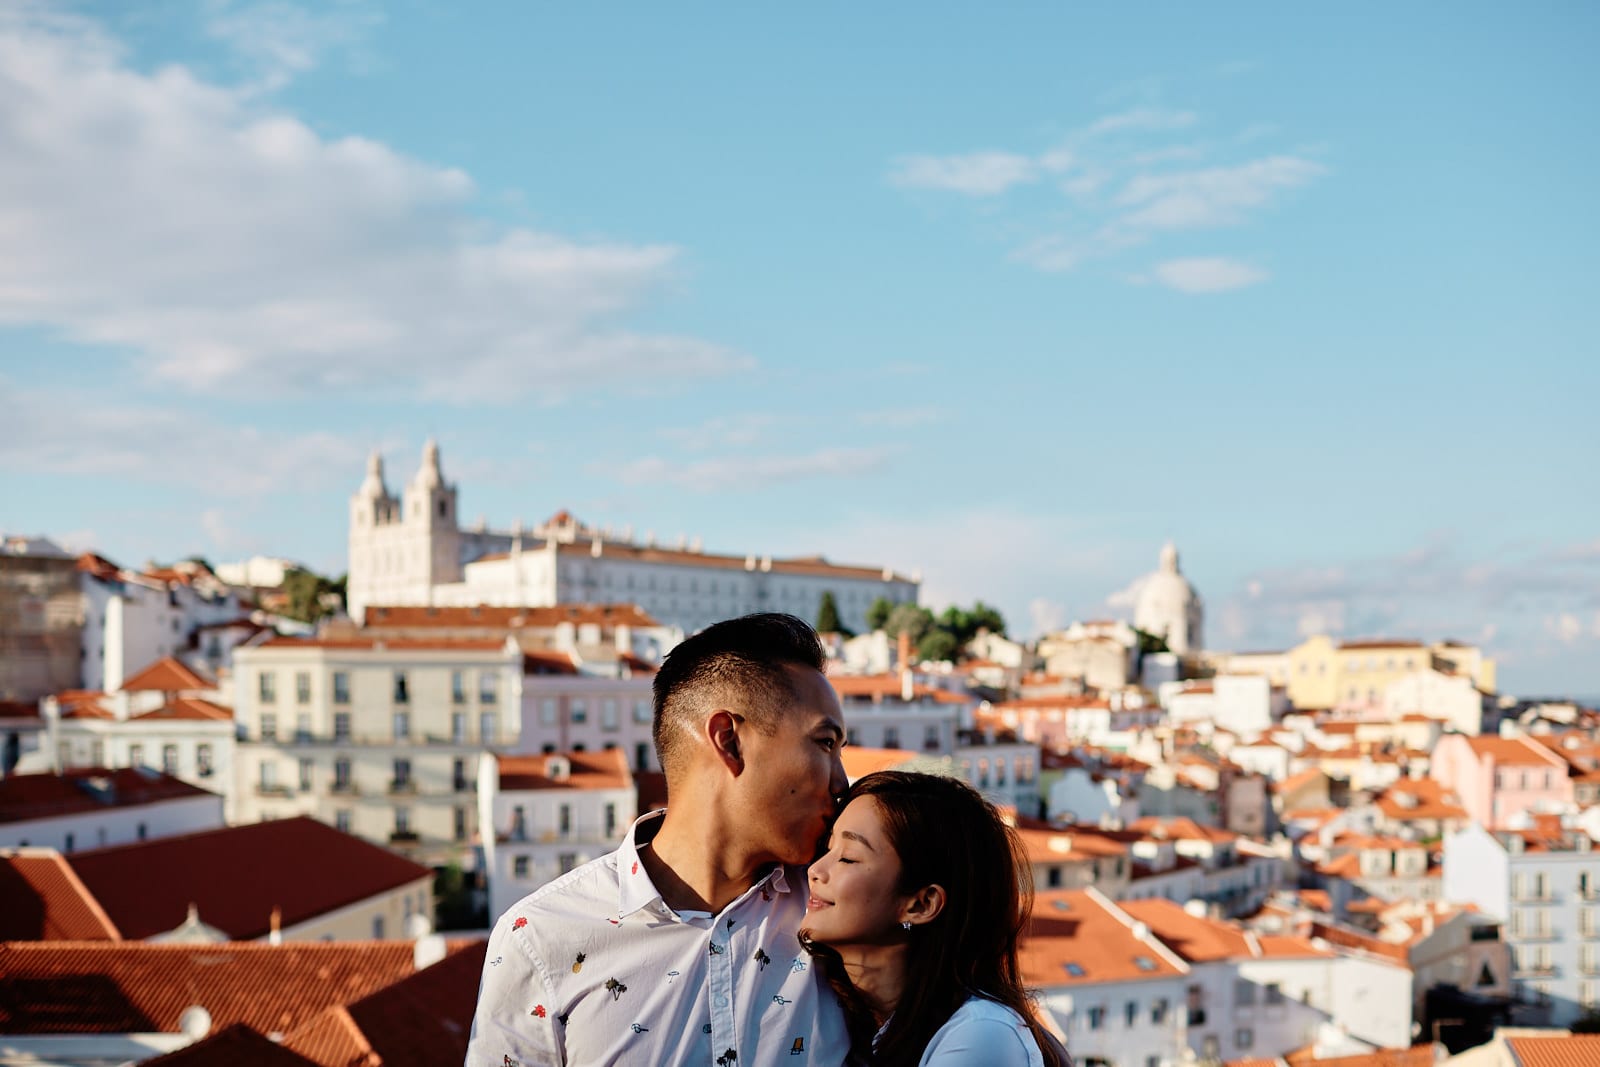 Eliza Sam and Joshua Ngo in a romantic pose with Alfama's roofs as a backdrop, during a photoshoot in Lisbon